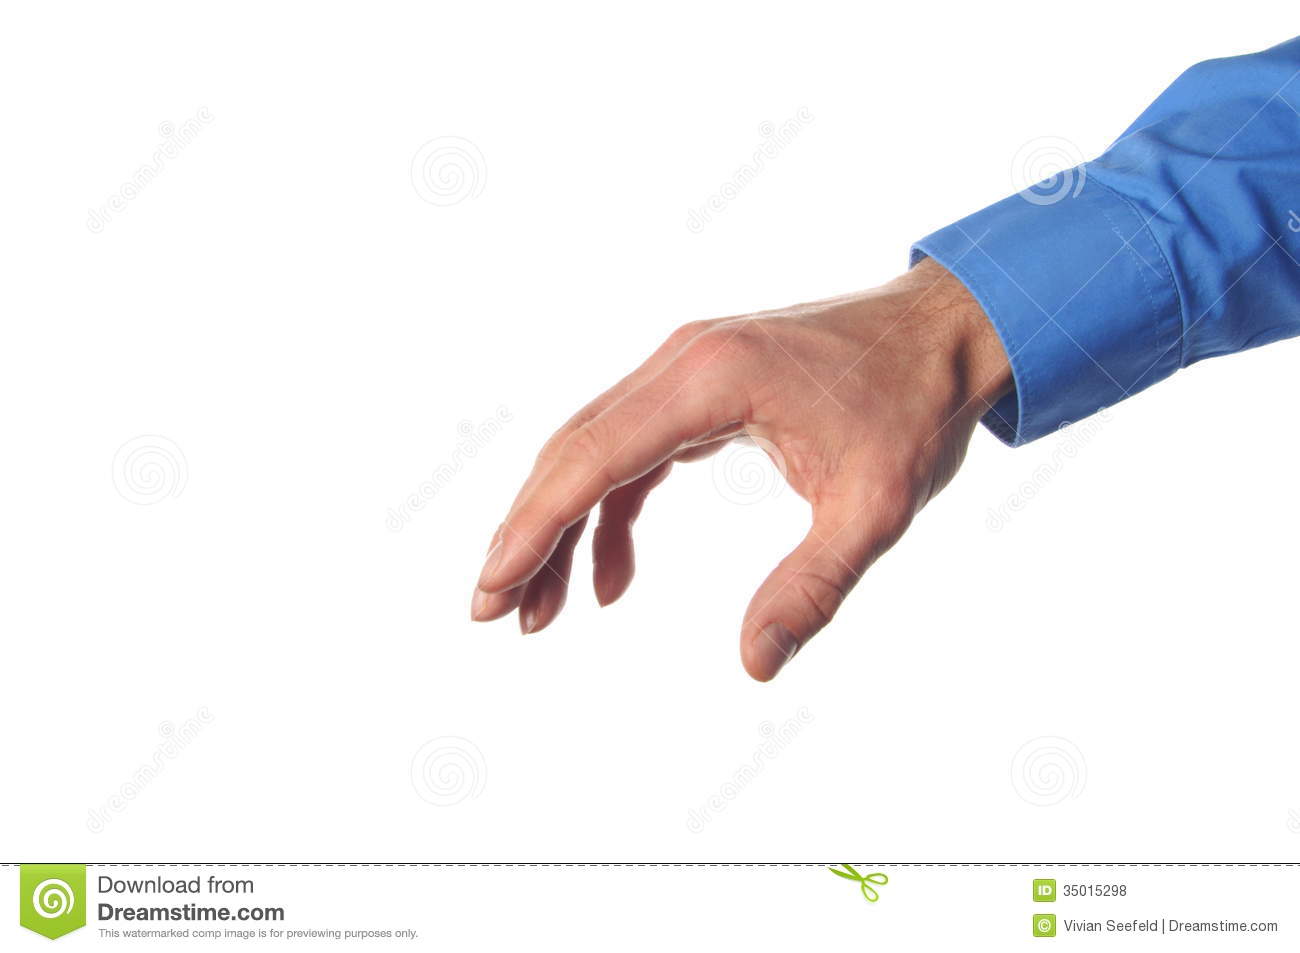 Hand Reaching For Something Royalty Free Stock Photos   Image